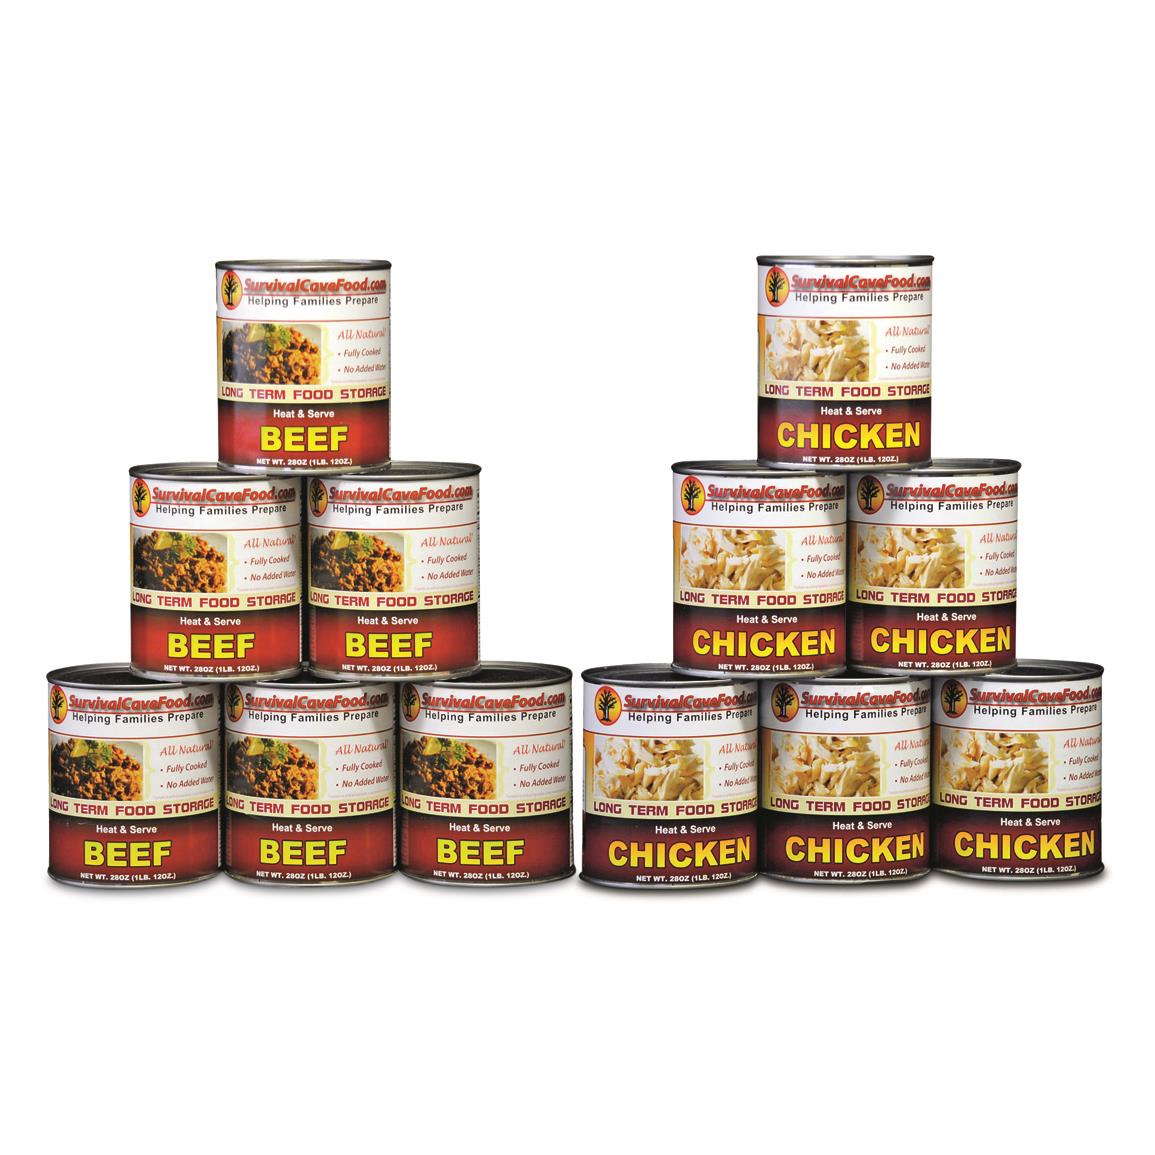 Survival Cave Canned Beef & Chicken, 12 Pack, 28-oz. Cans